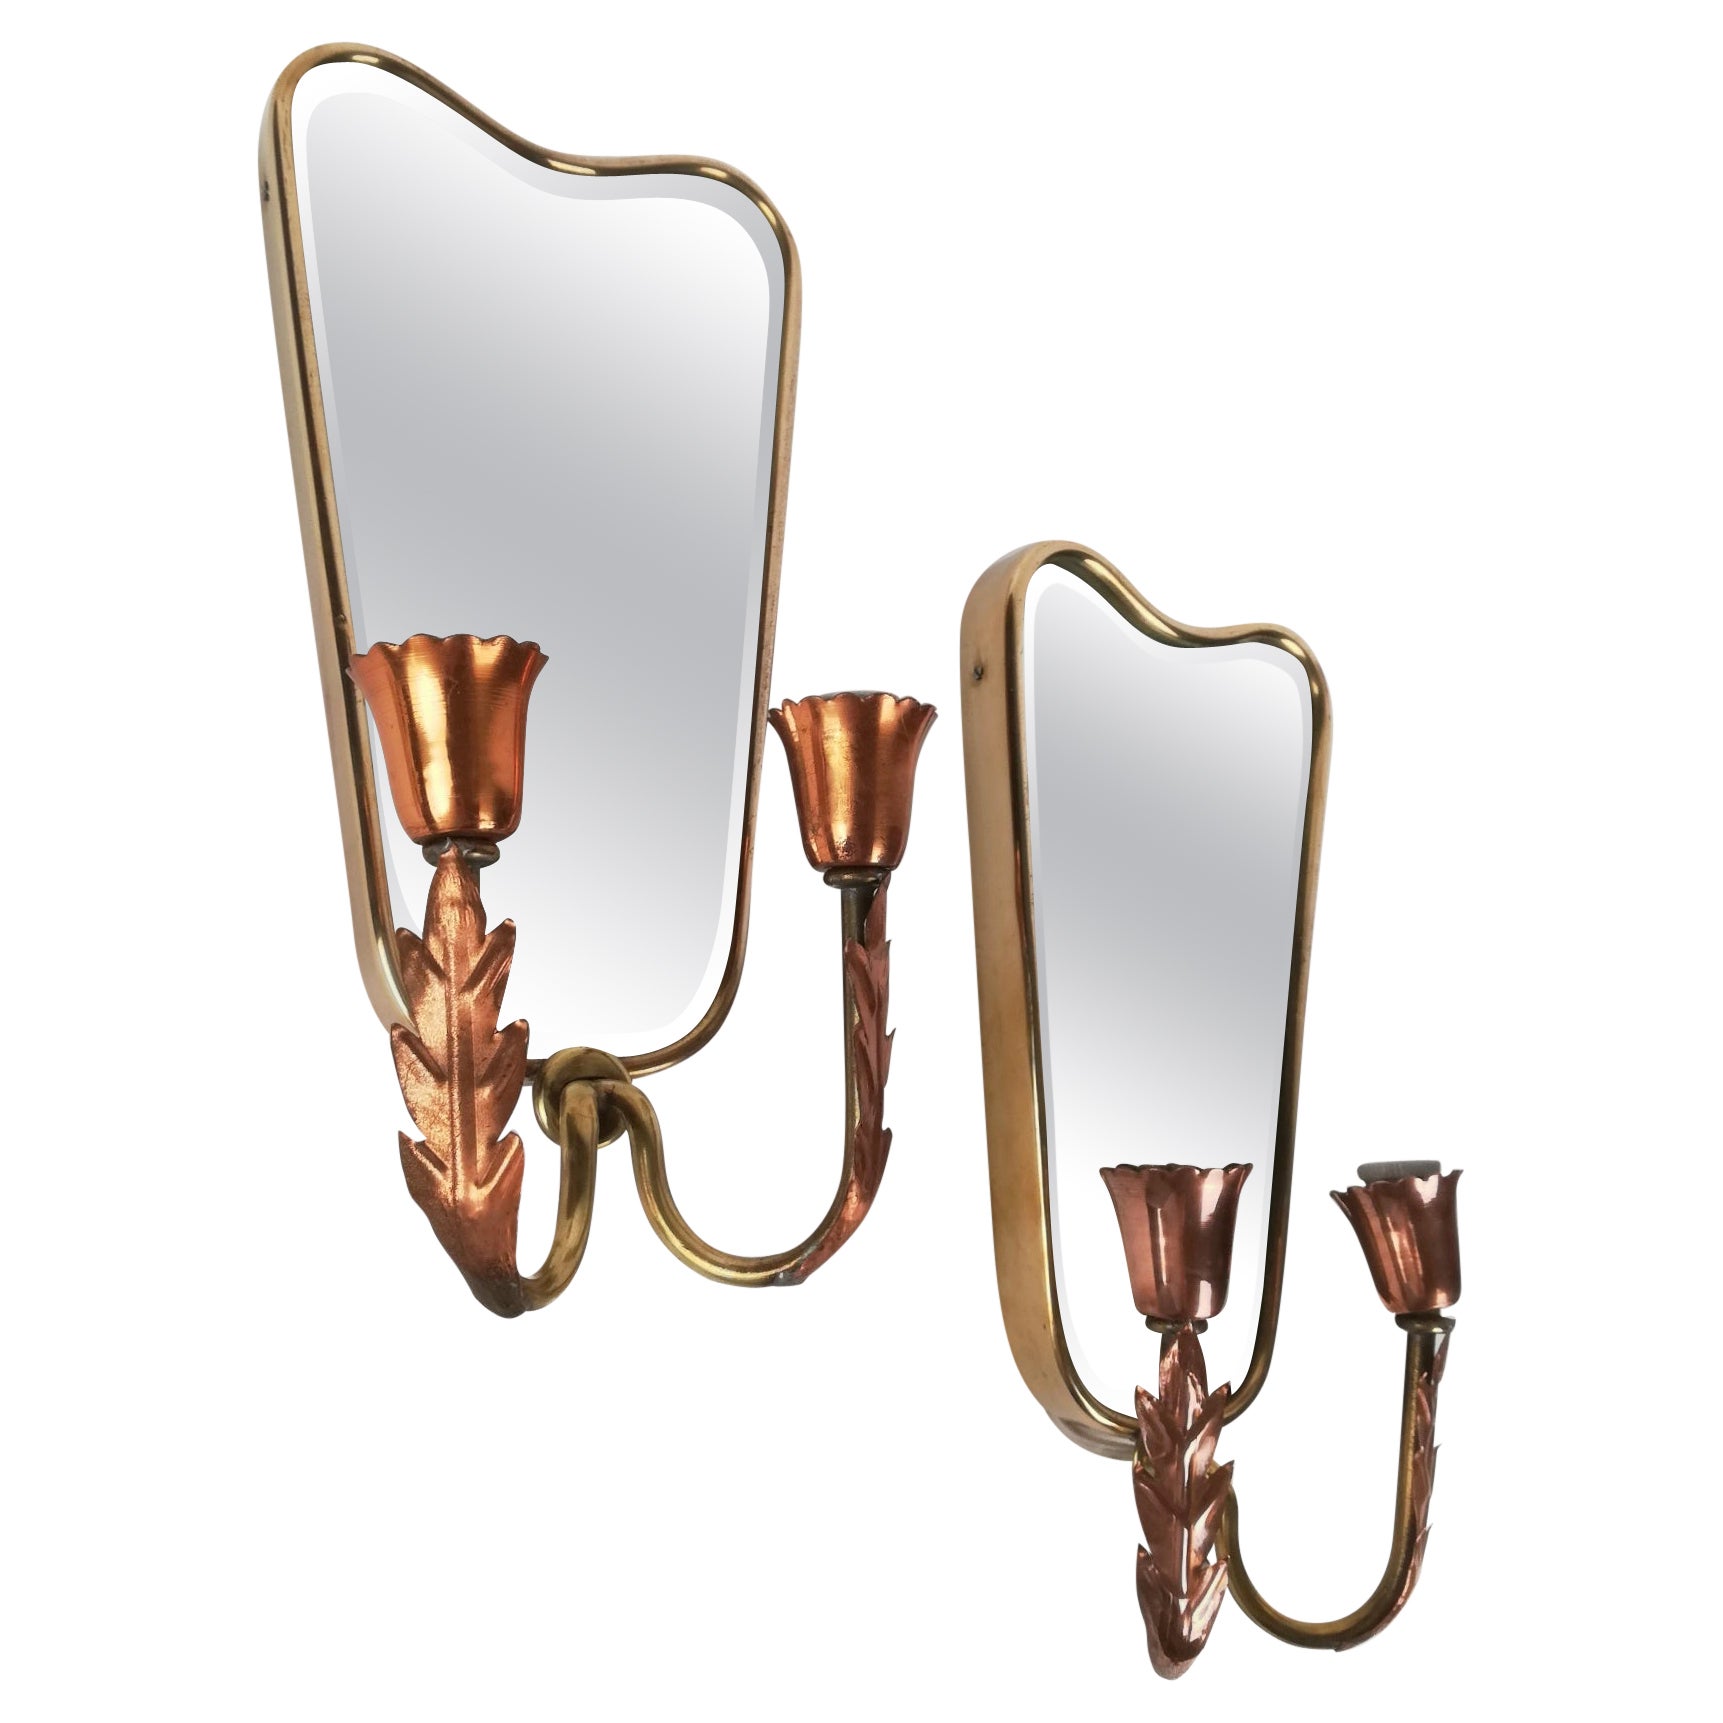 Midcentury Wall Light with Brass Mirrors in the Style of Gio Ponti, Italy, 1950 For Sale